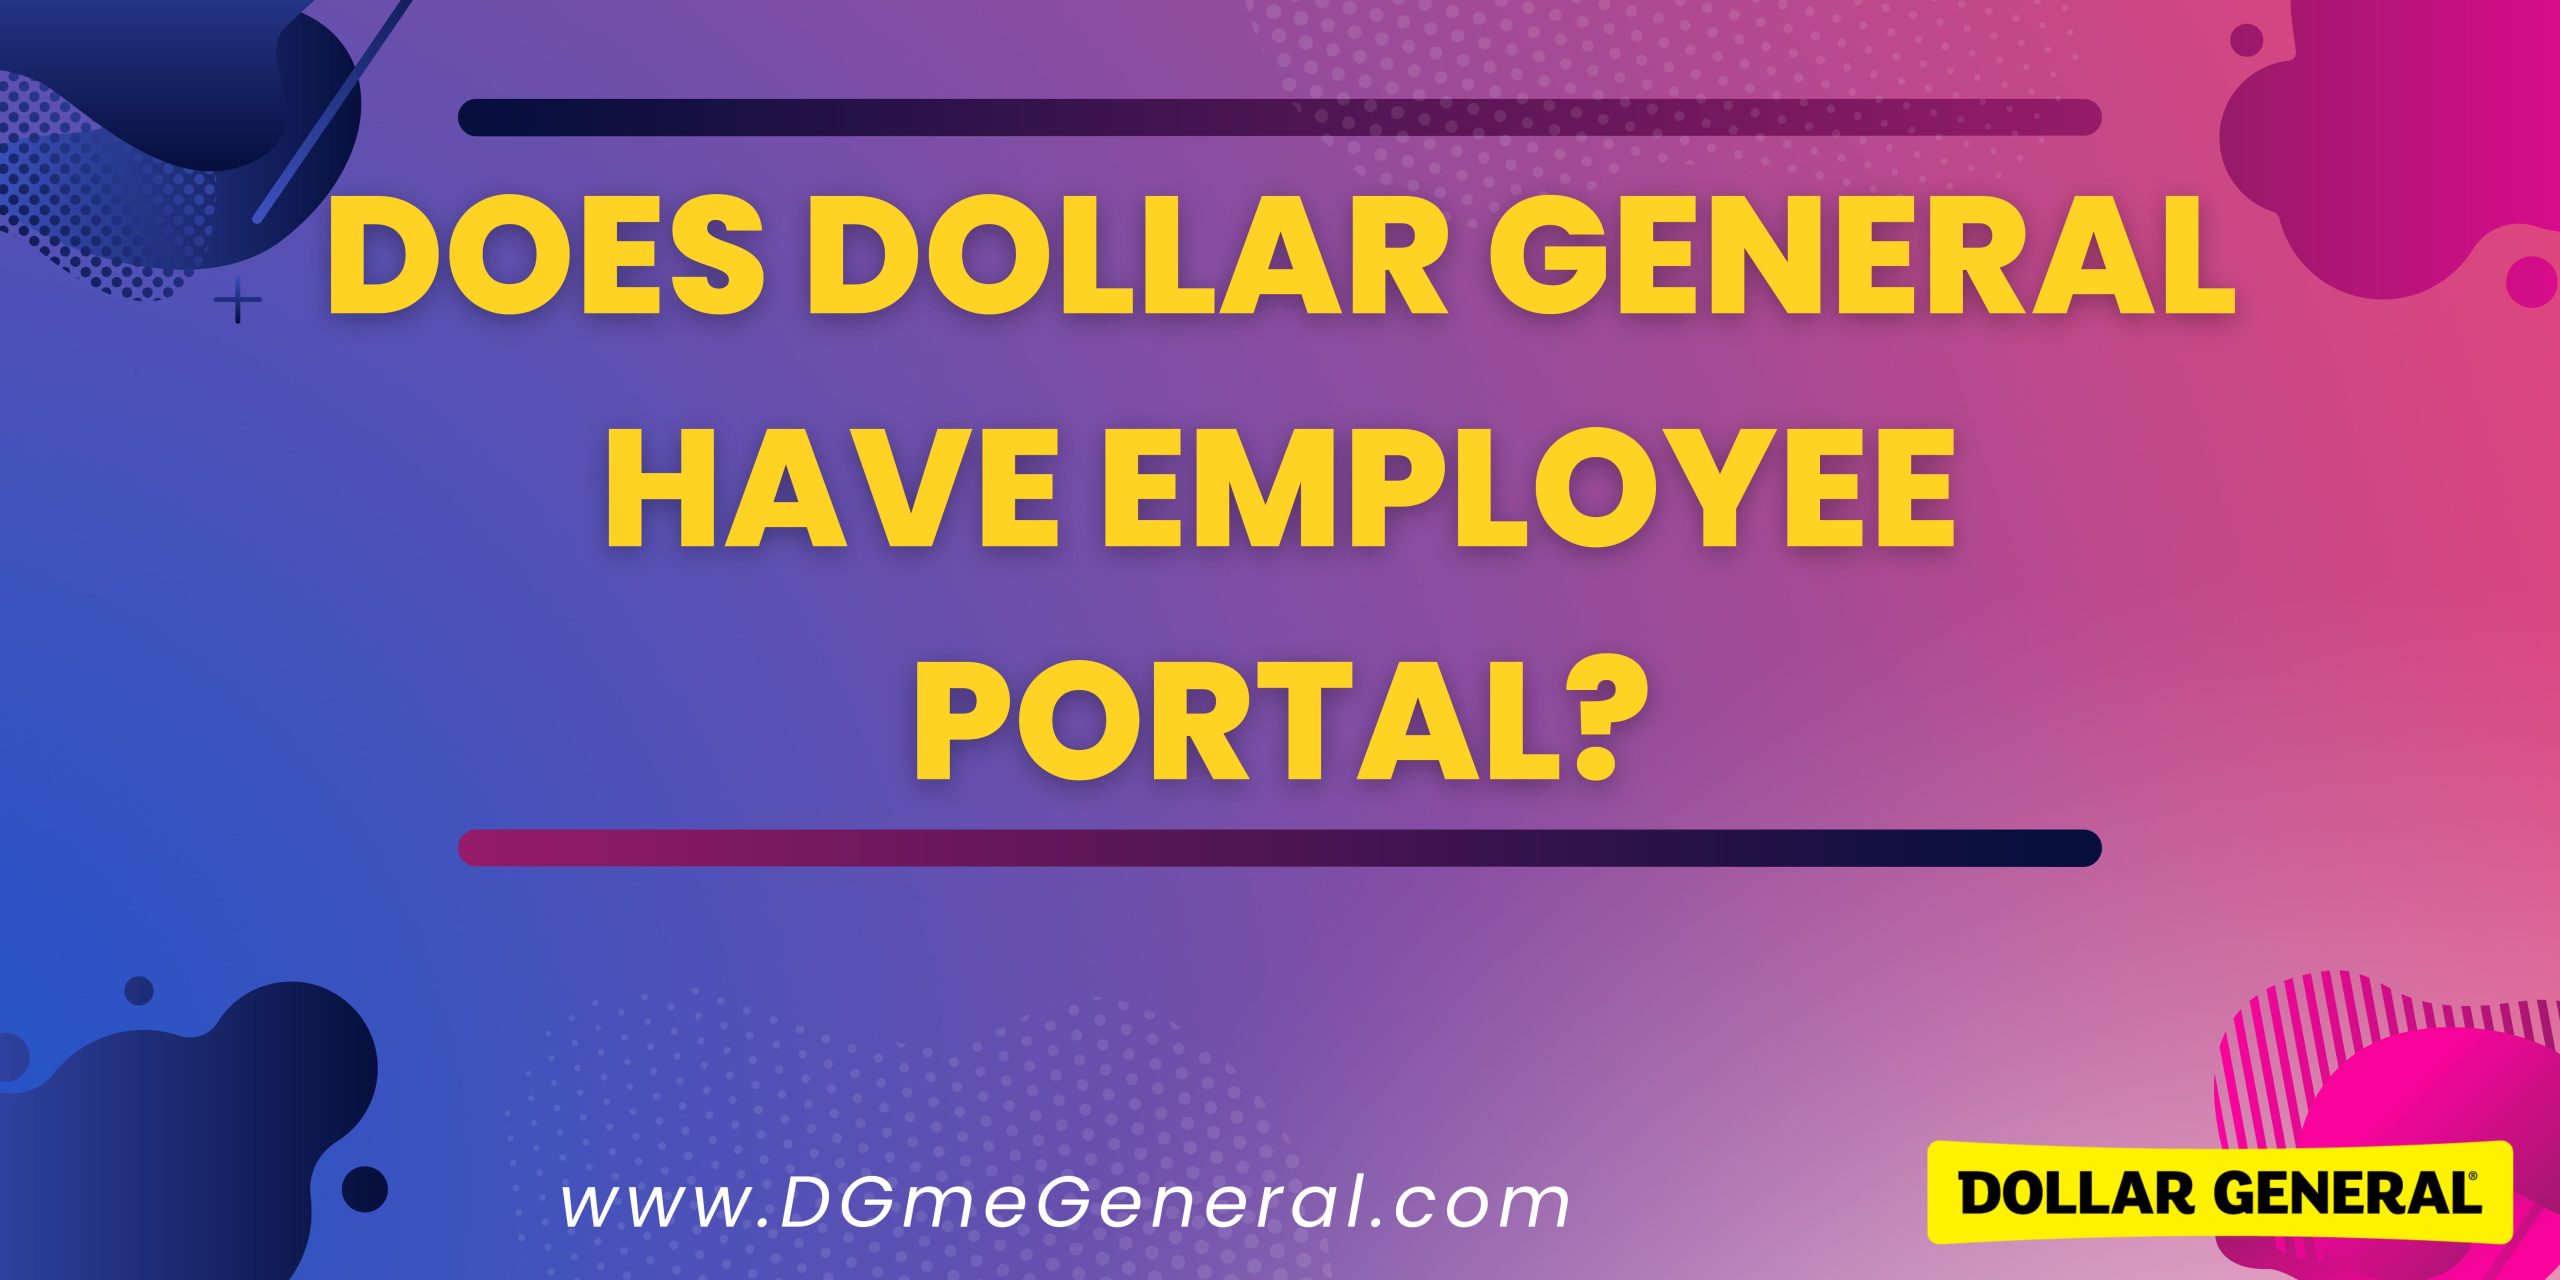 Does dollar general have employee portal